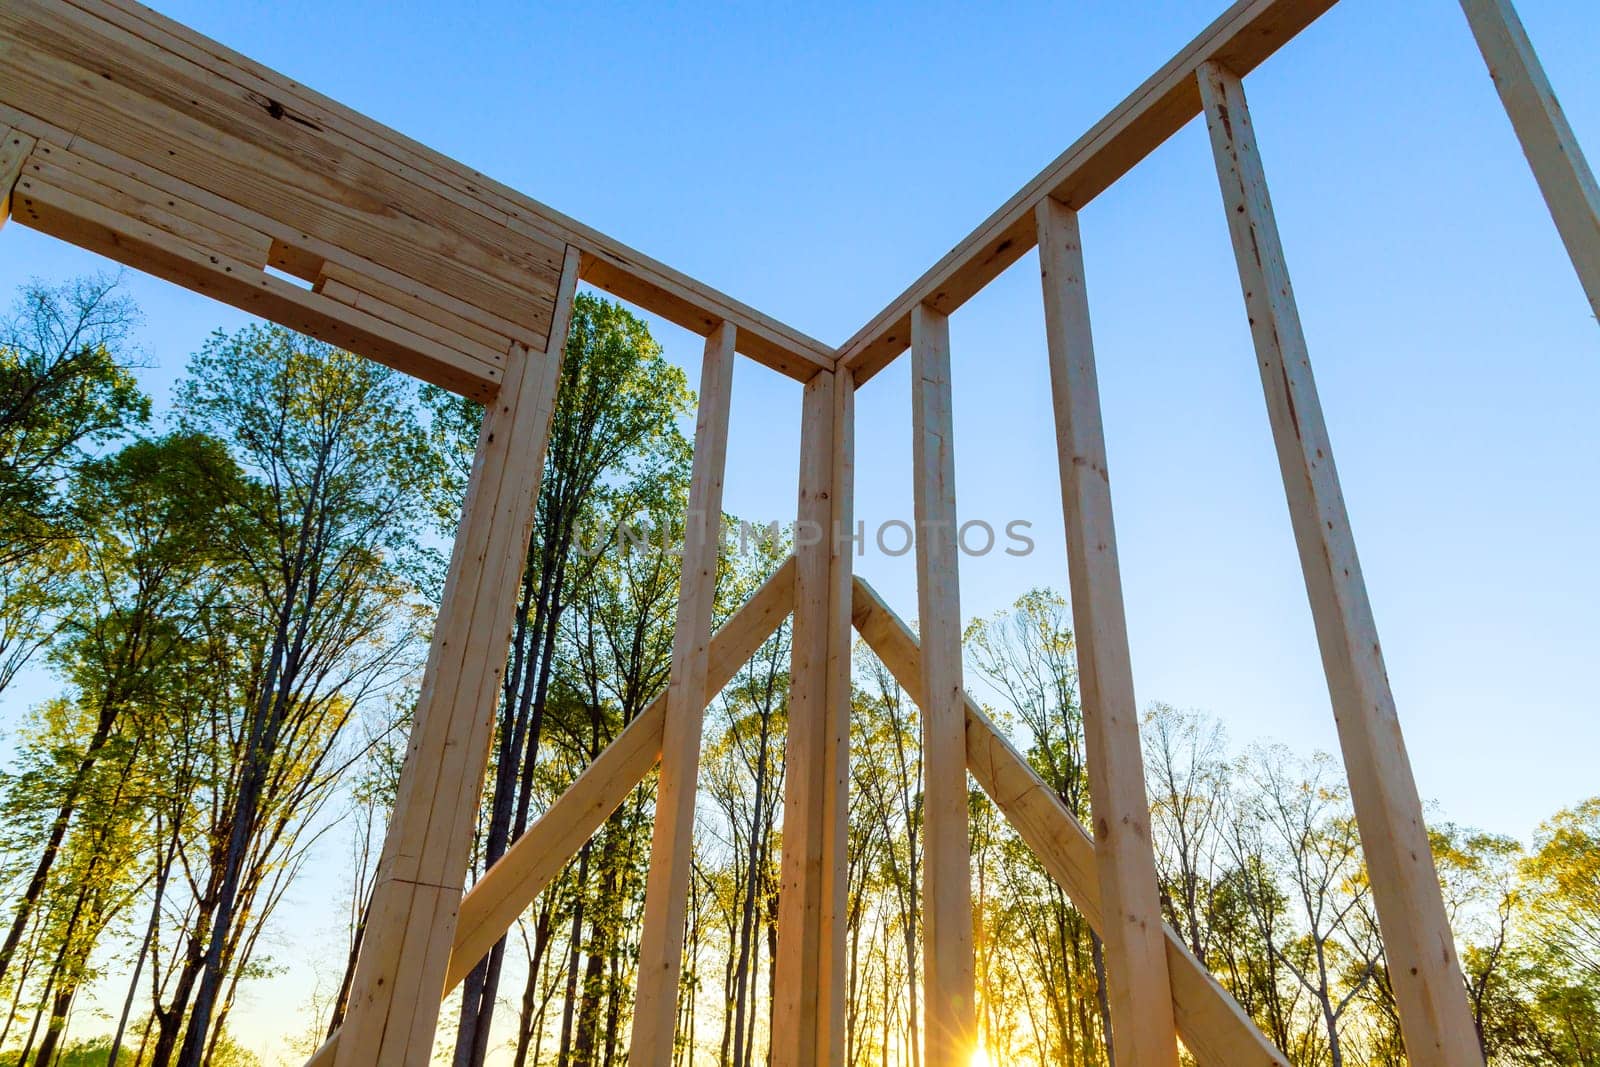 Wooden framing supports beams supports timber framing, along with an unfinished interior